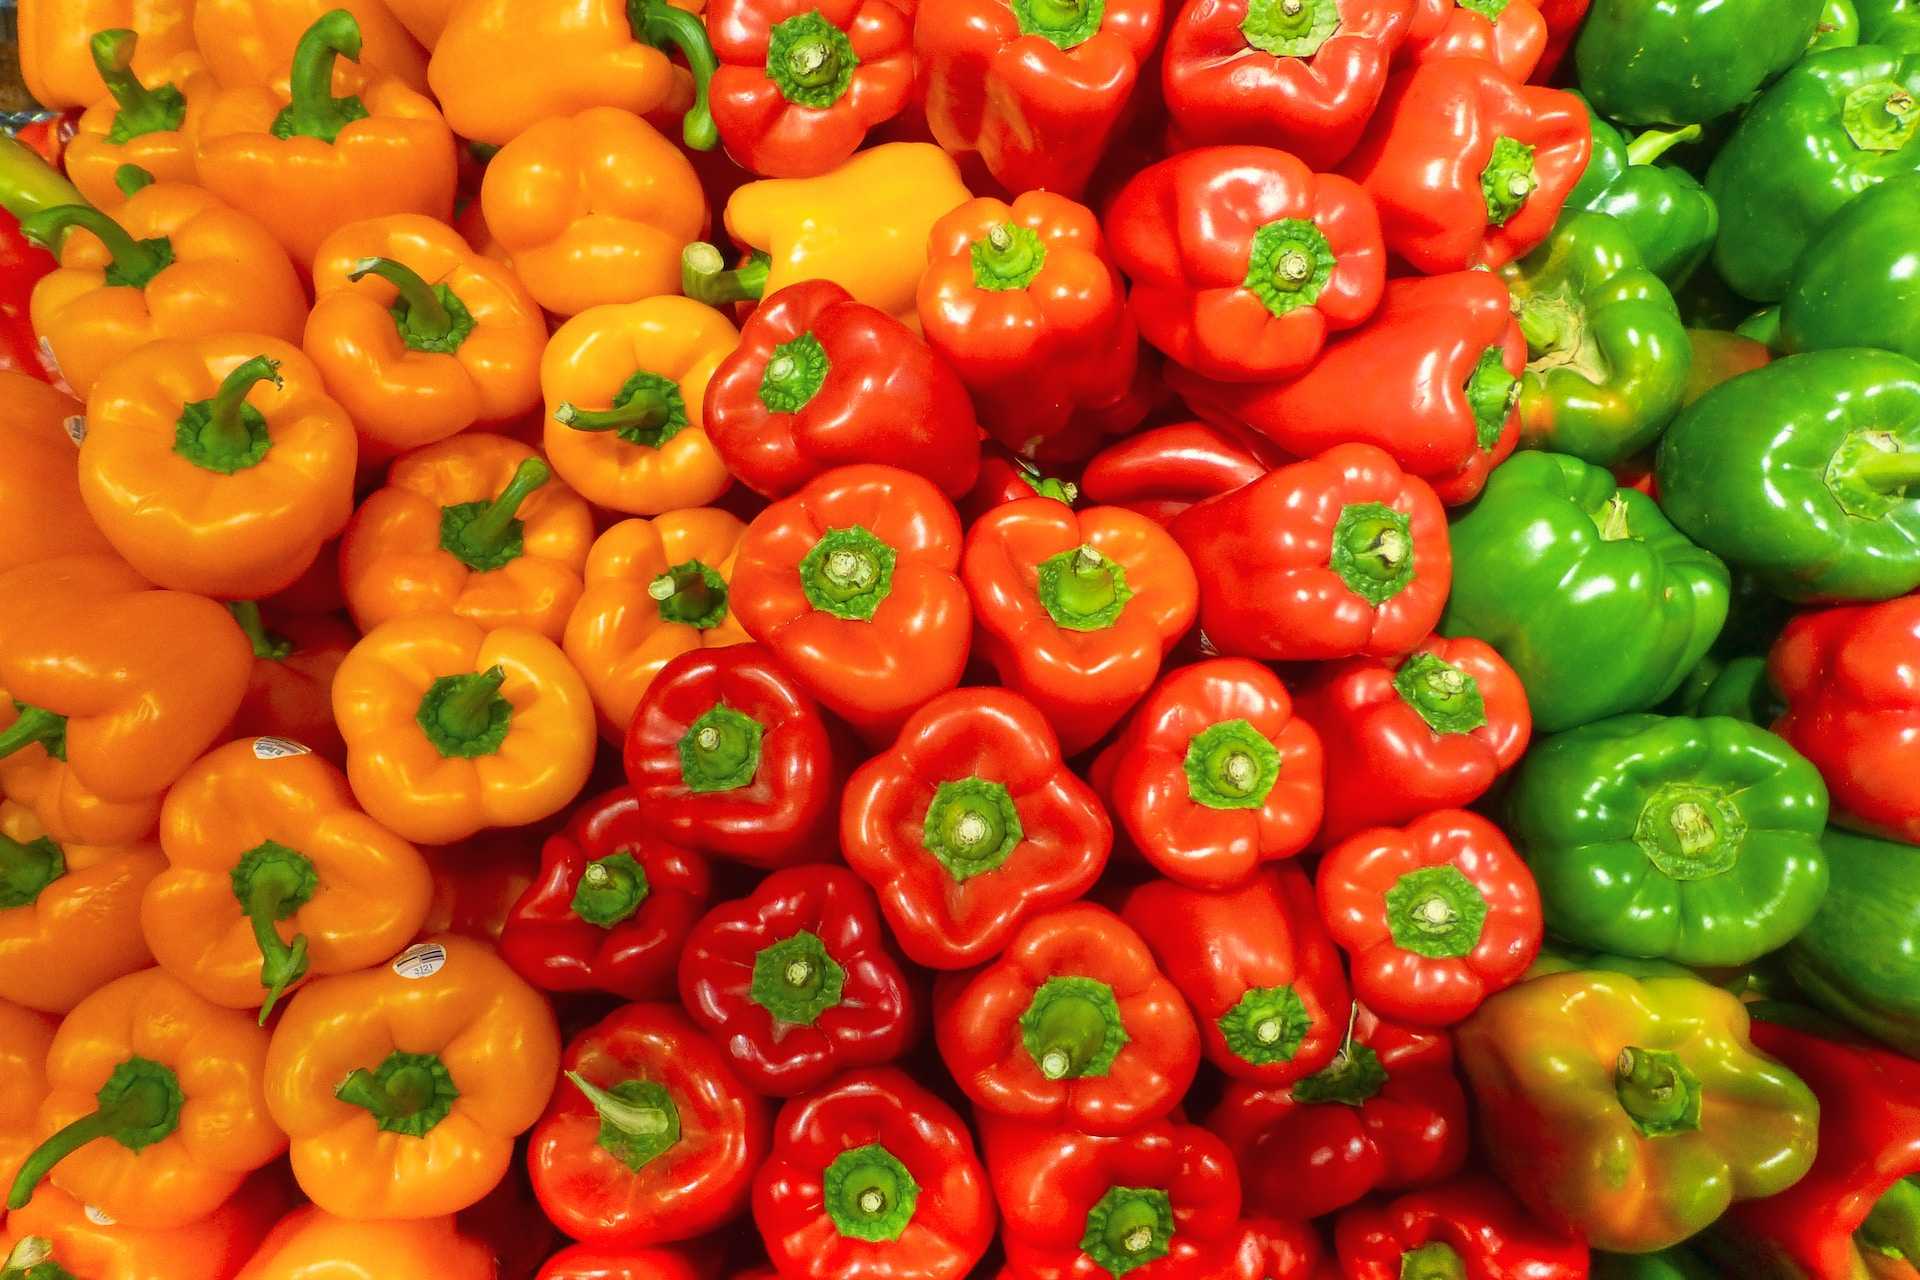 Red Bell Peppers Information and Facts